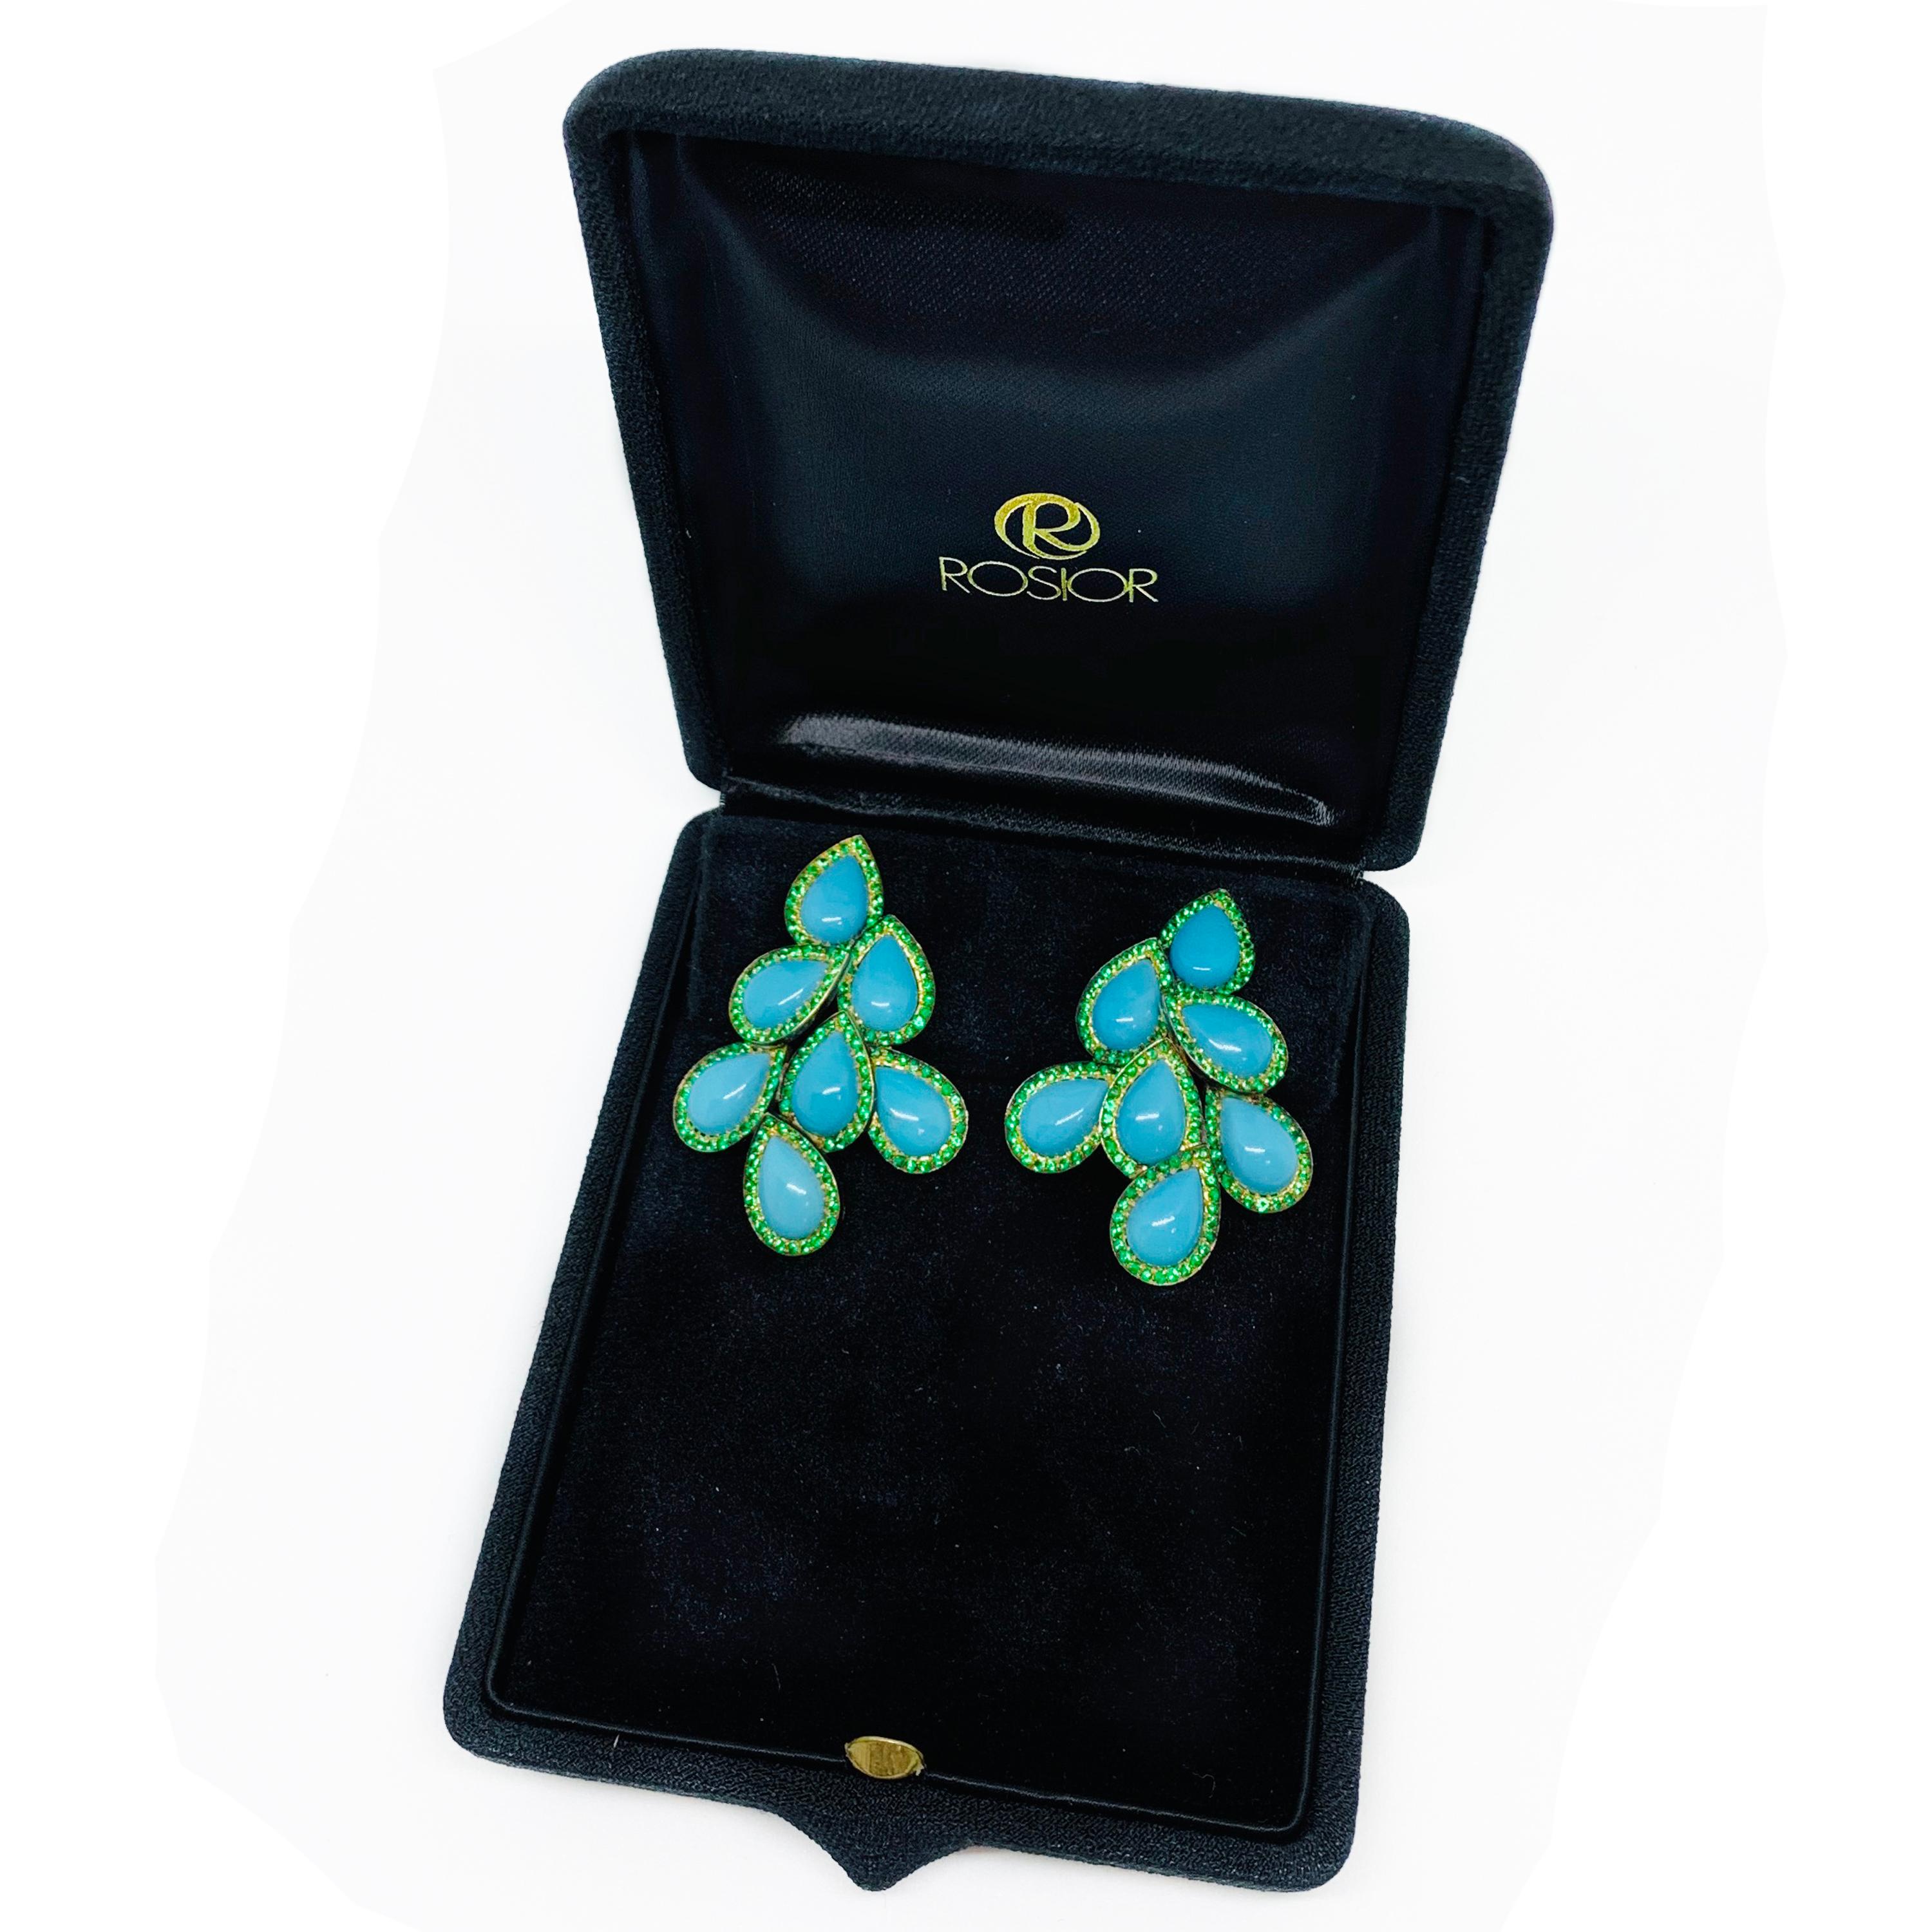 Cabochon Rosior one-off Turquoise and Emerald Drop Earrings set in Yellow Gold